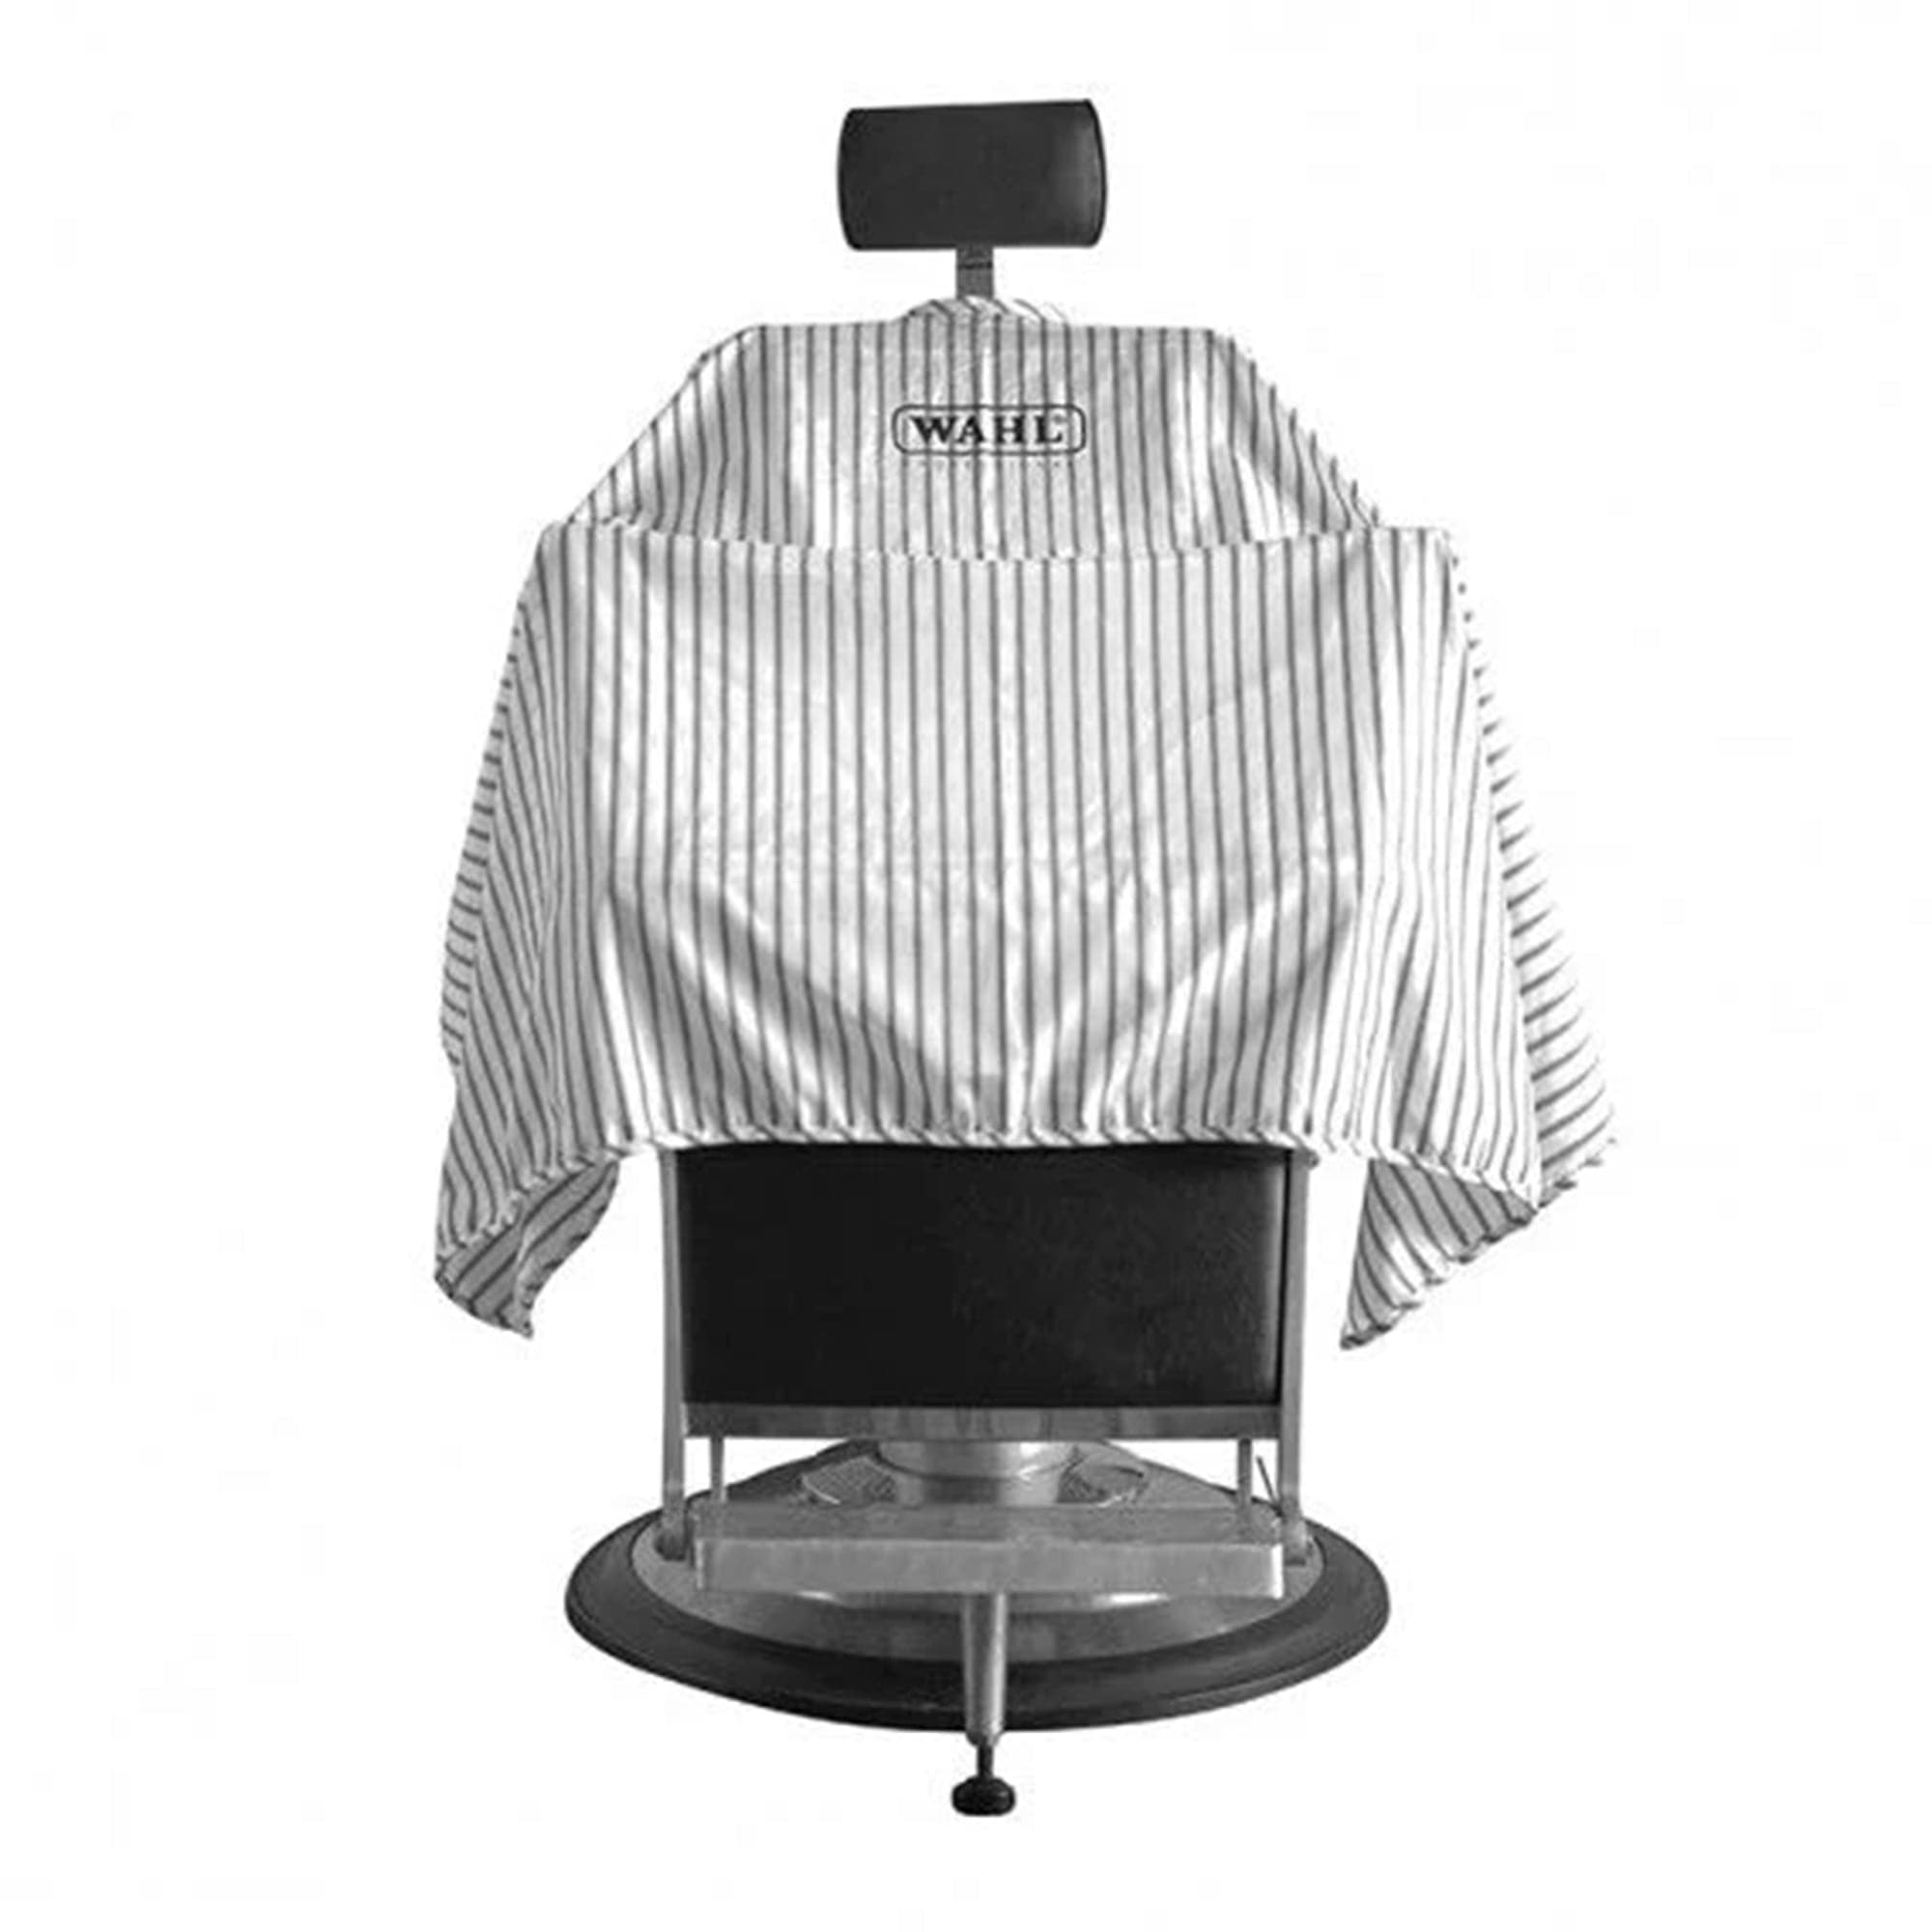 Wahl - Barber Hairdressing Hair Cutting Cape & Gown Black & White Stripes